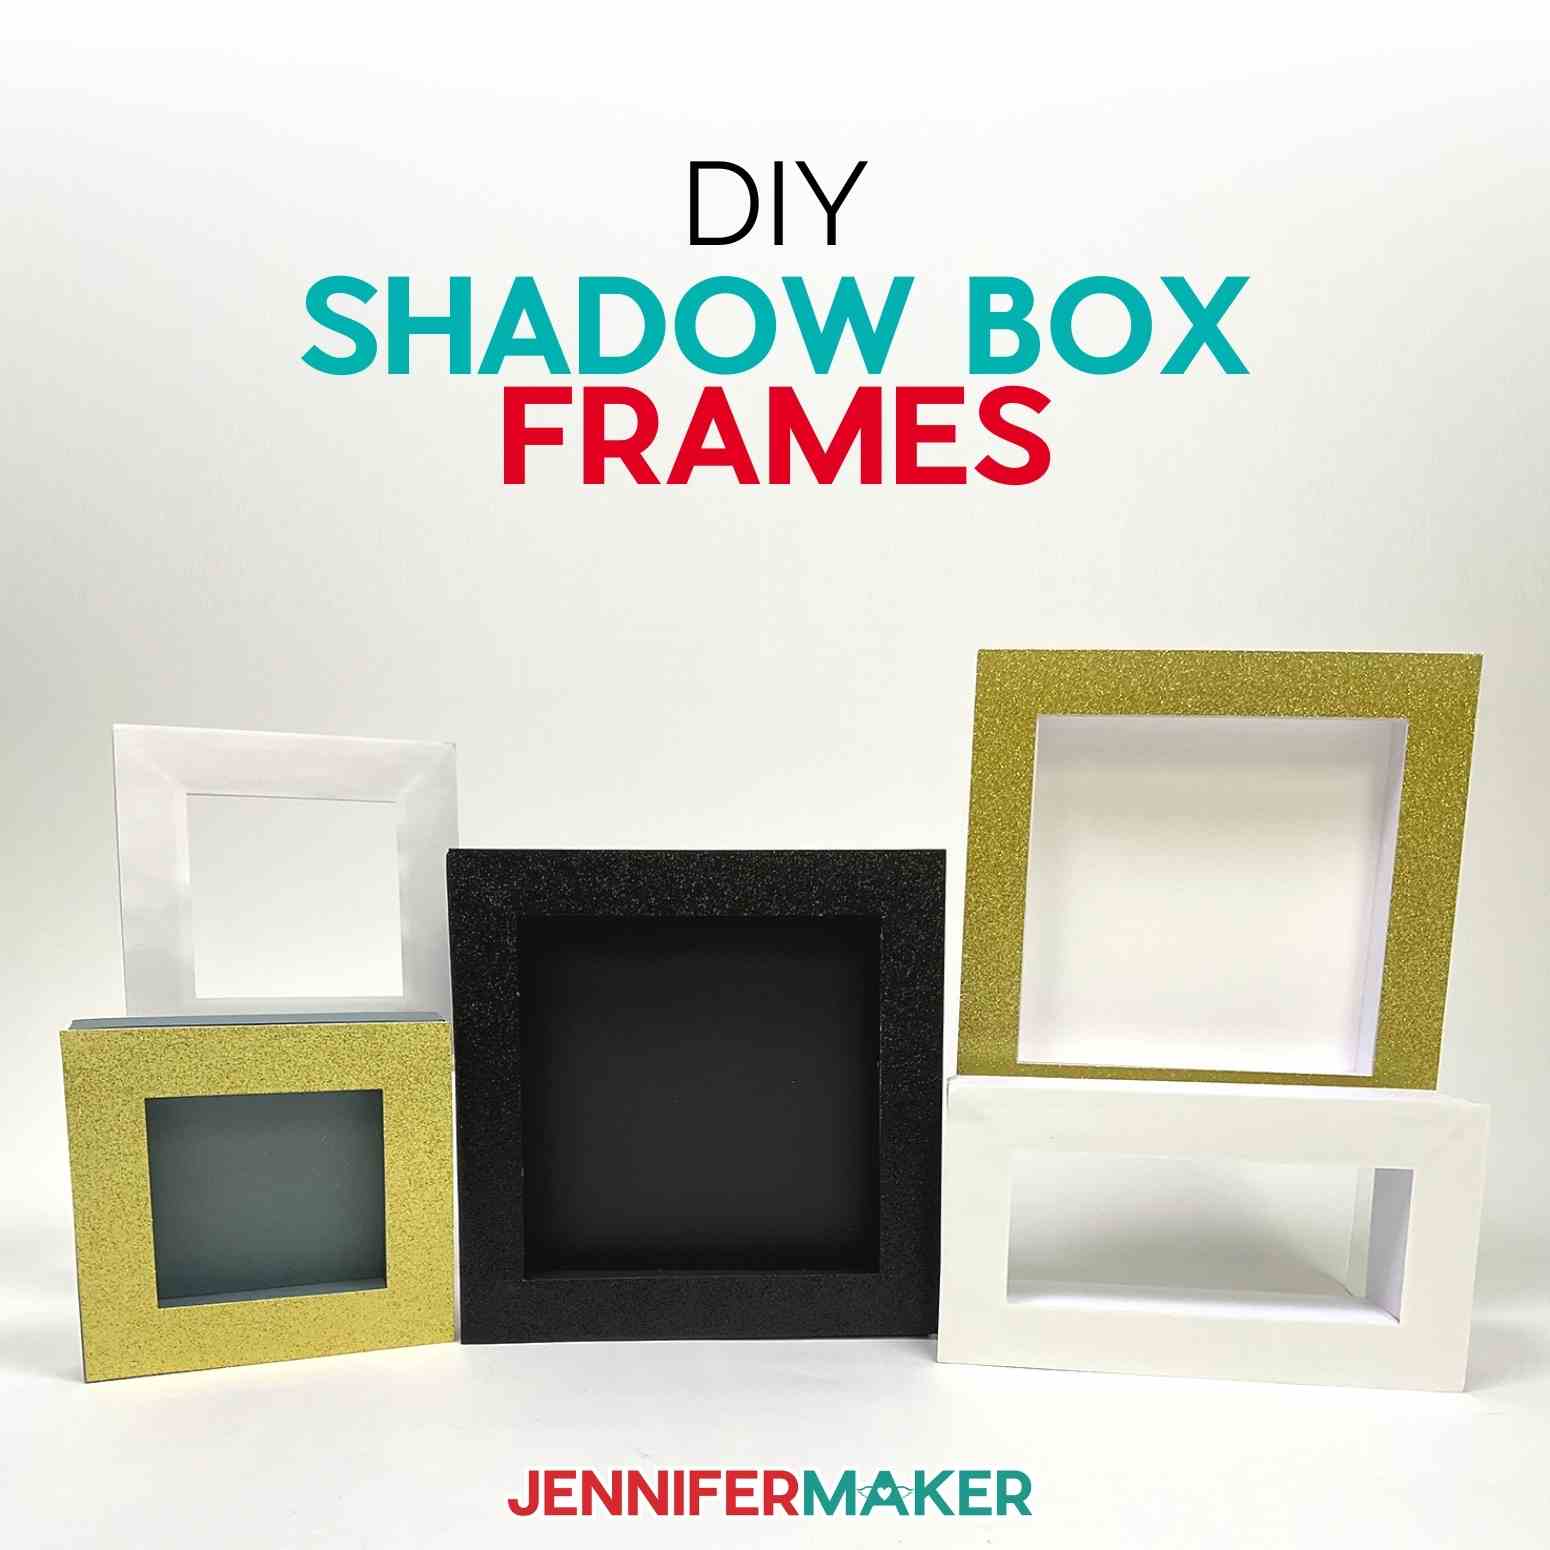 DIY Shadow Box Frames: Affordable Paper Picture Frames for Your Projects!